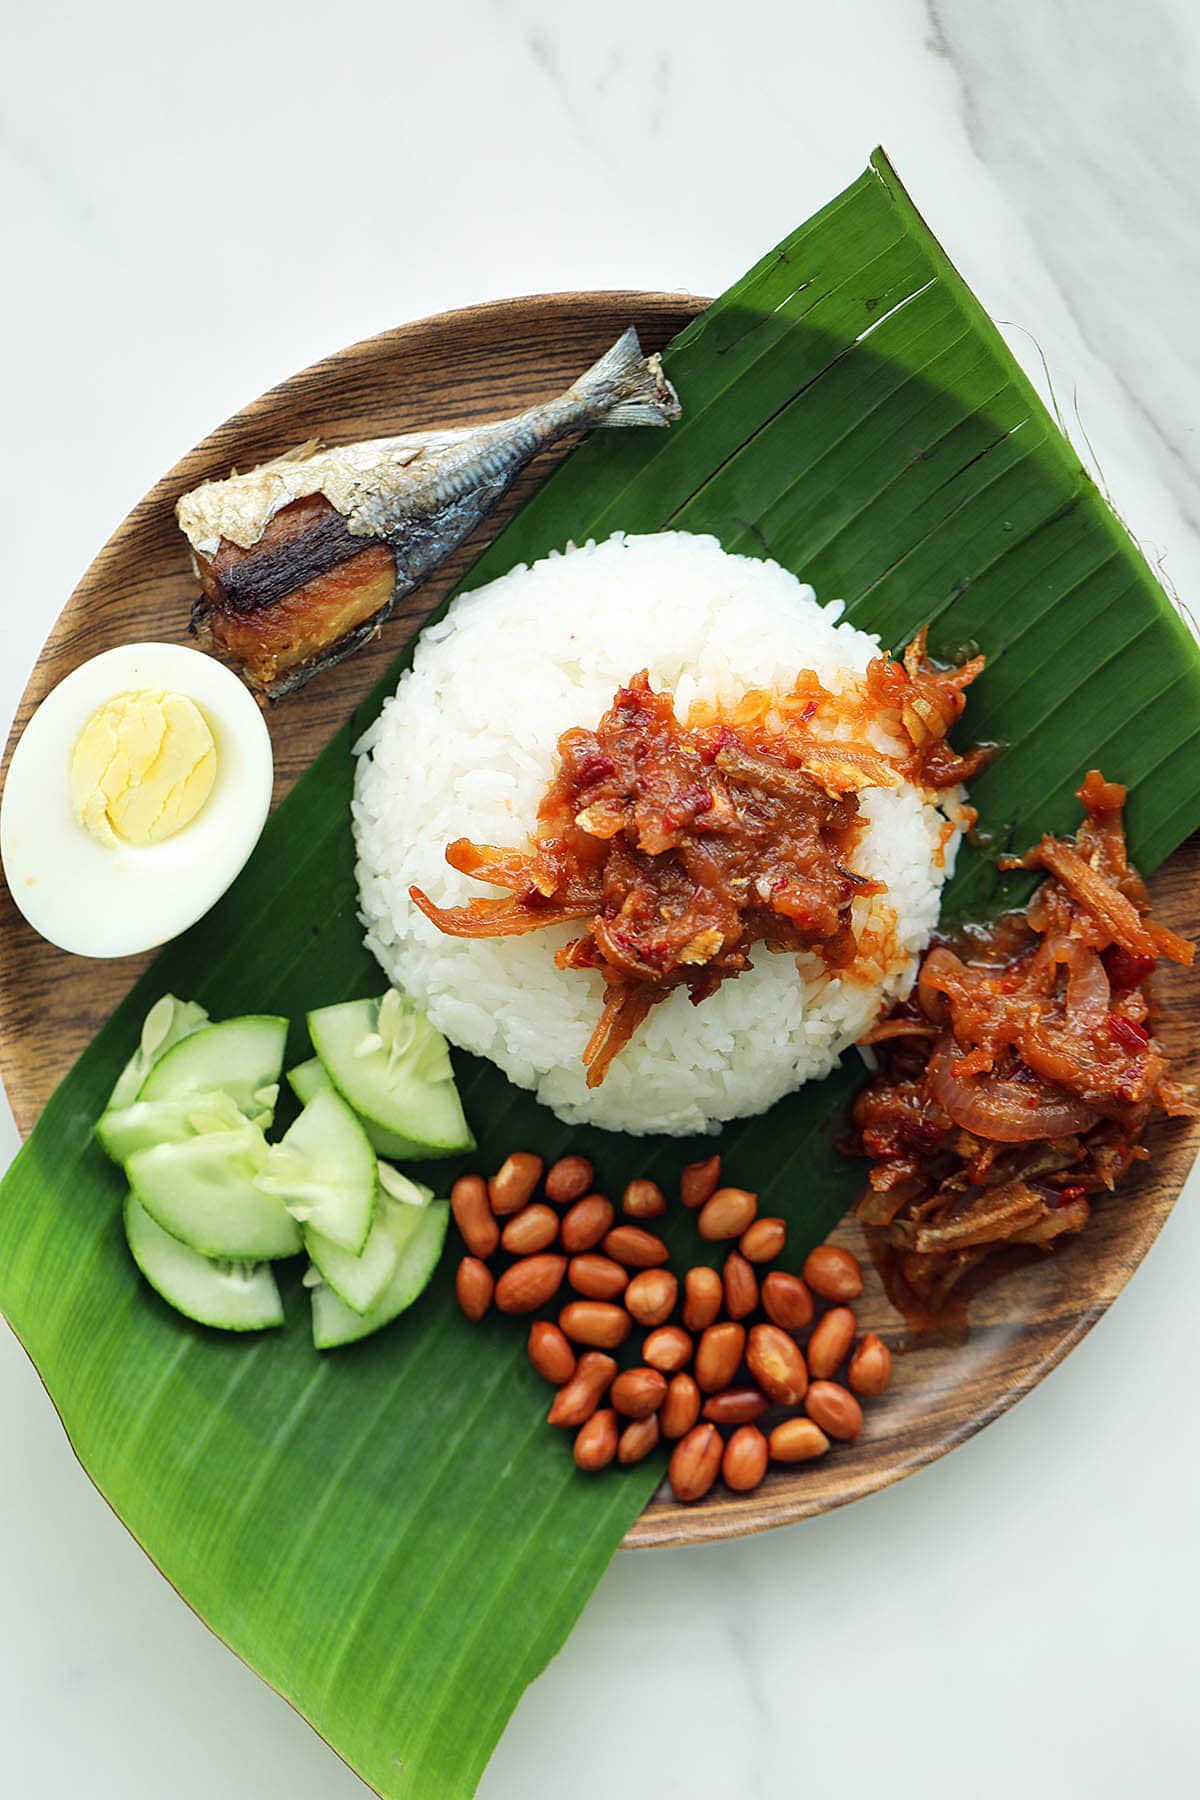 Malaysian coconut milk rice, served with sambal anchovies, roasted peanuts, hard-boiled egg and cucumber on banana leaf.